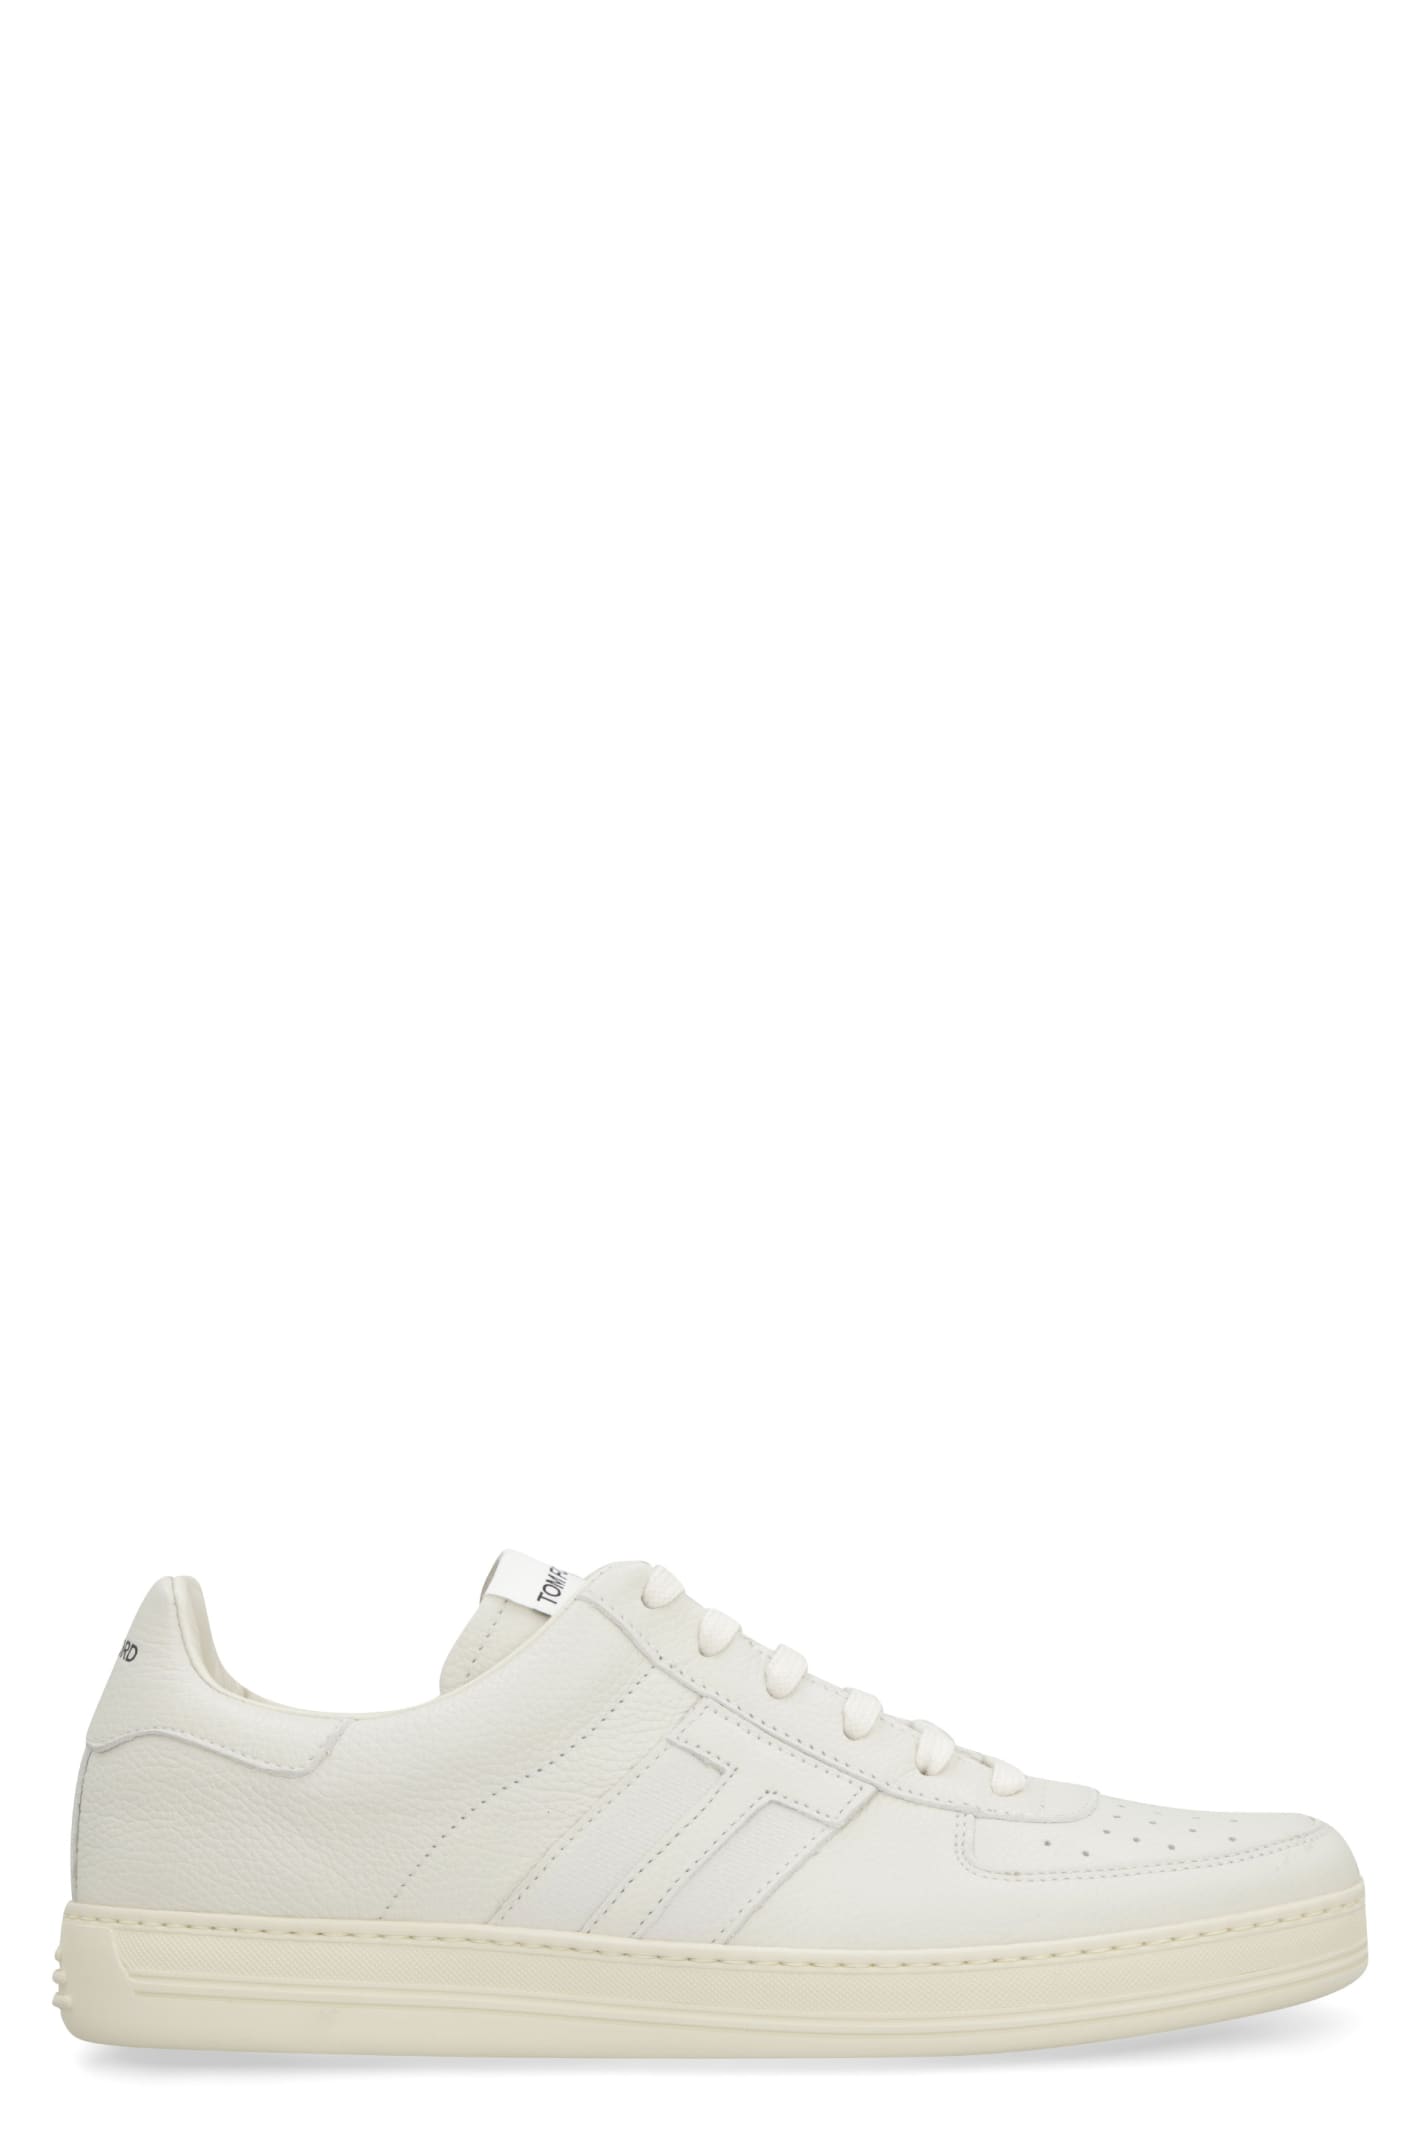 Tom Ford Radcliffe Leather Low-top Sneakers